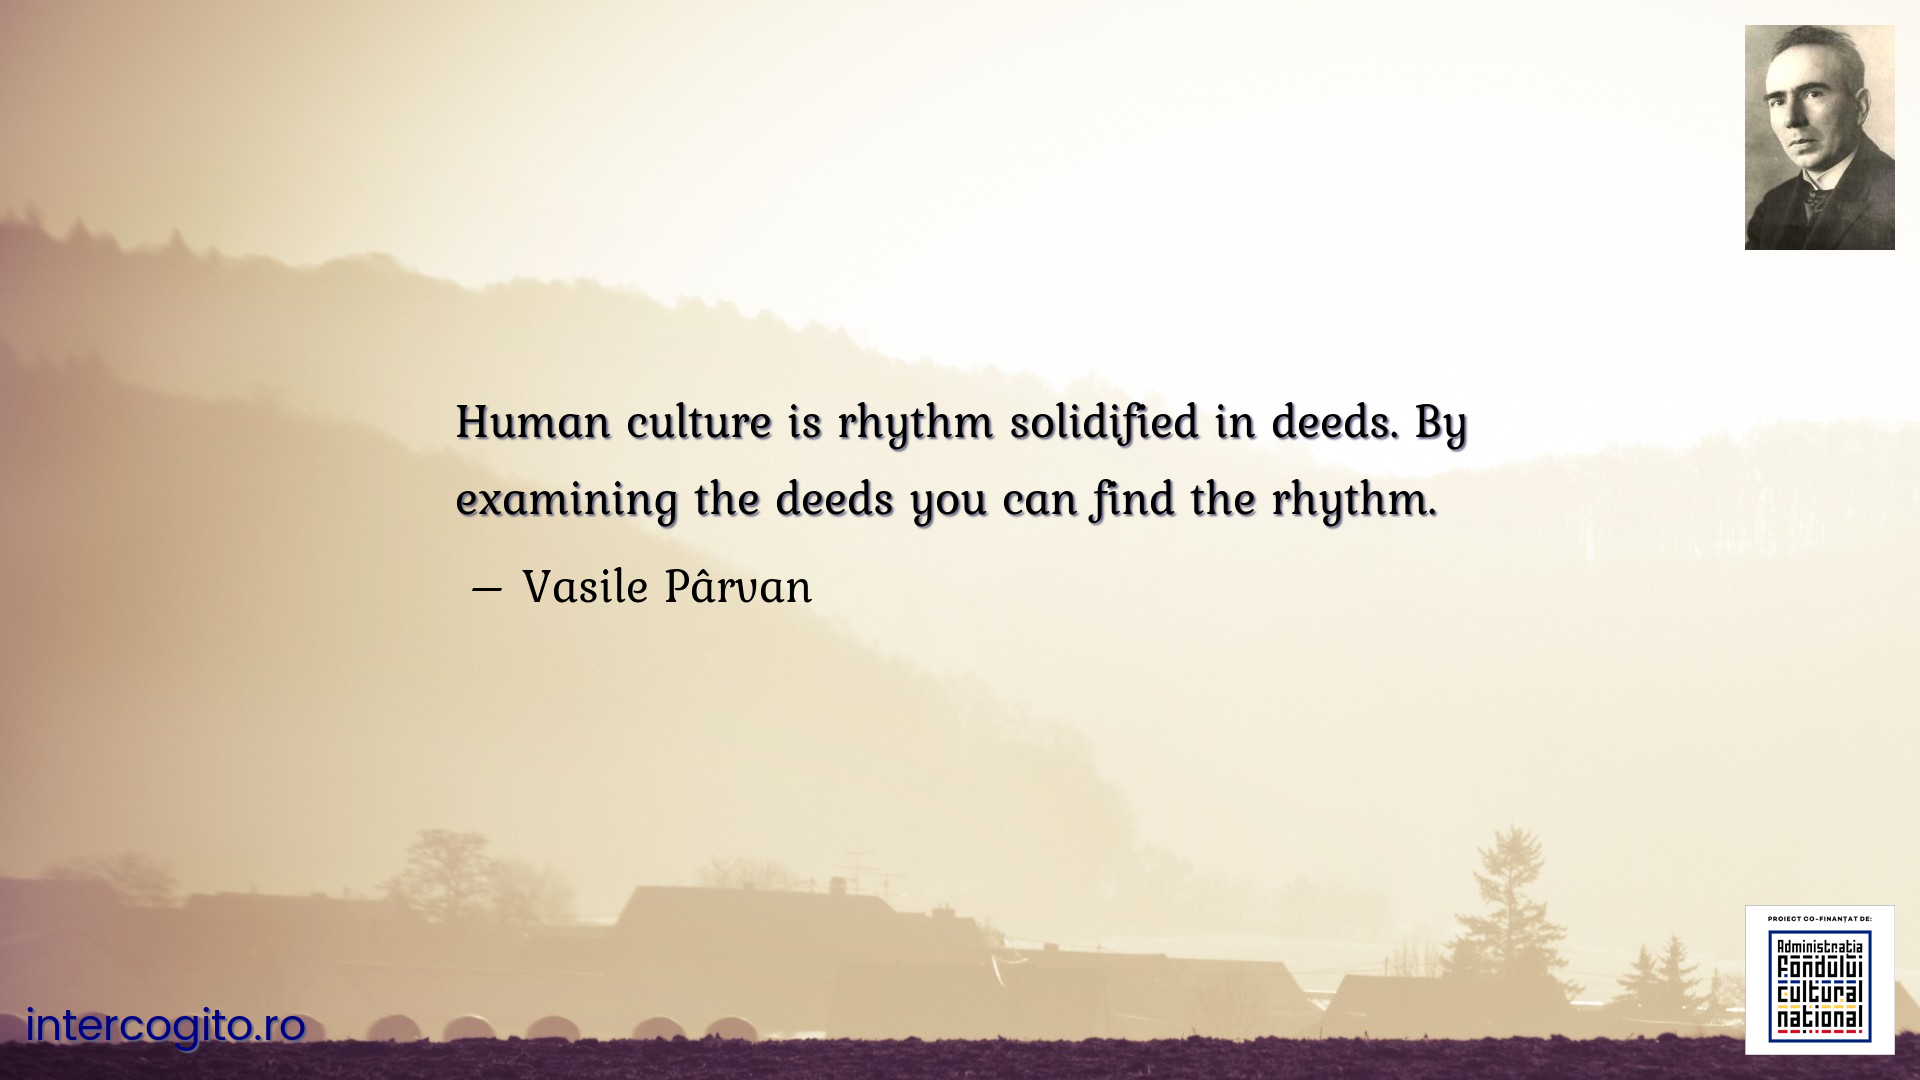 Human culture is rhythm solidified in deeds. By examining the deeds you can find the rhythm.